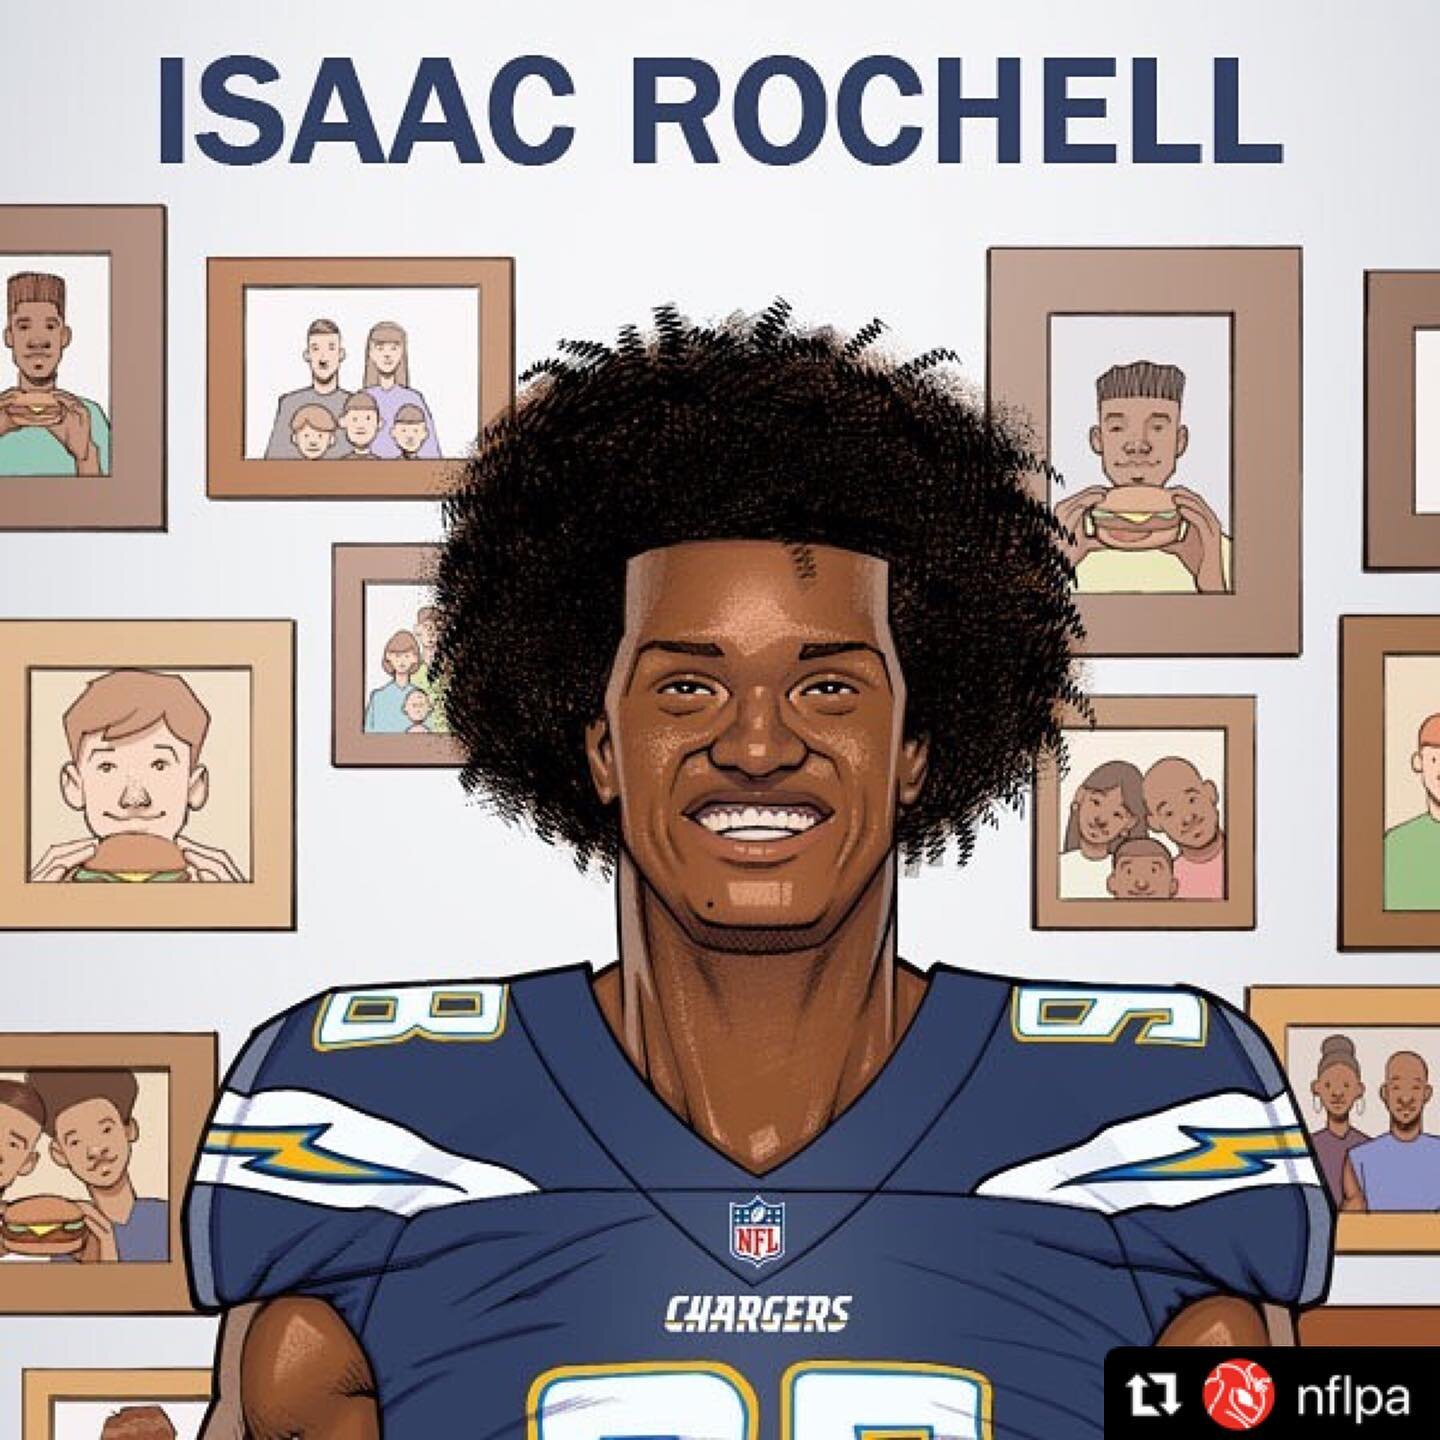 #Repost @nflpa
・・・
Our final #CommunityMVP of the 2020 season goes to @isaacrochell! 👏👏👏
The @Chargers player rep has donated more than $50K to social justice &amp; pandemic relief efforts through his @local.human non-profit.

You can help them ke